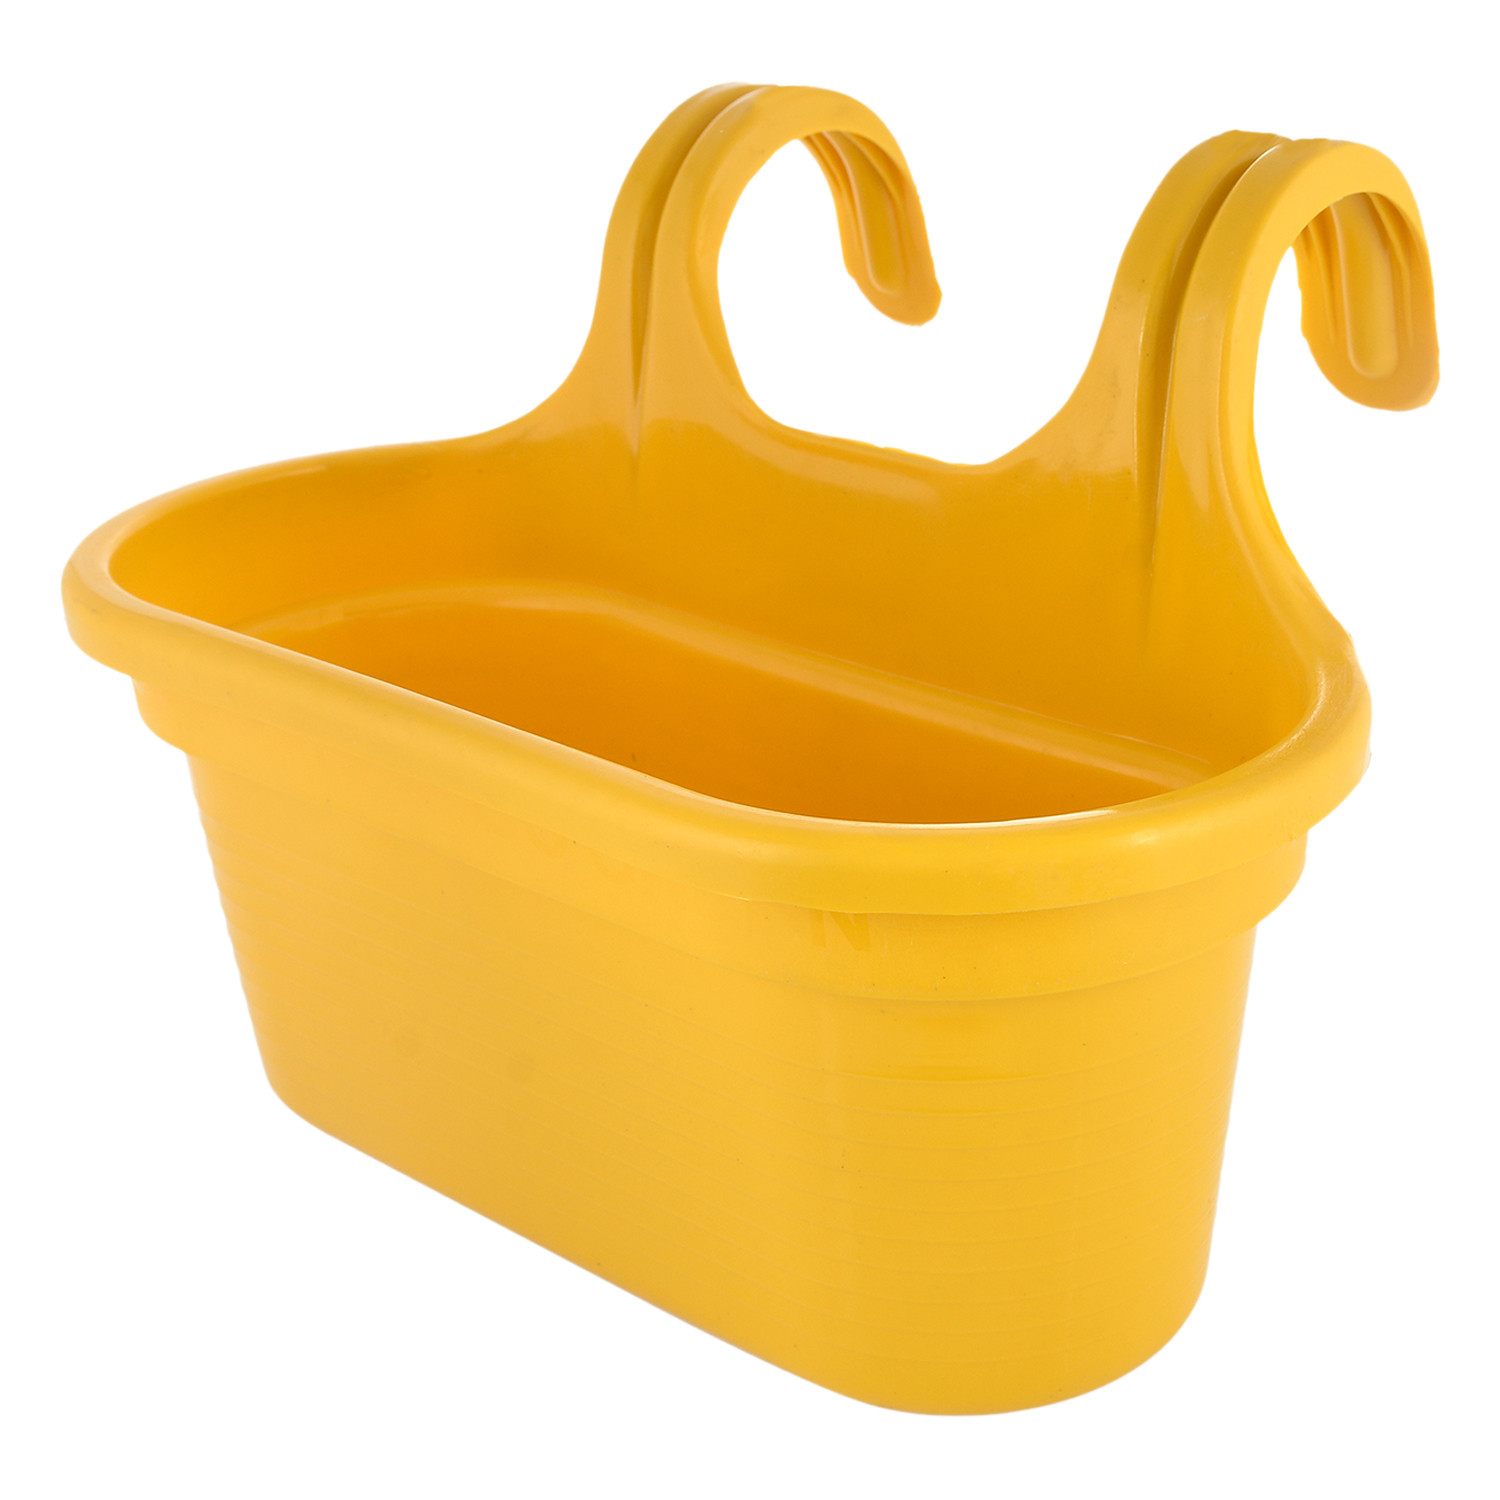 Kuber Industries Hanging Flower Pot|Double Hook Plant Container|Durable Plastic Glossy Finish Pots for Home|Balcony|Garden|12 Inch (Yellow)